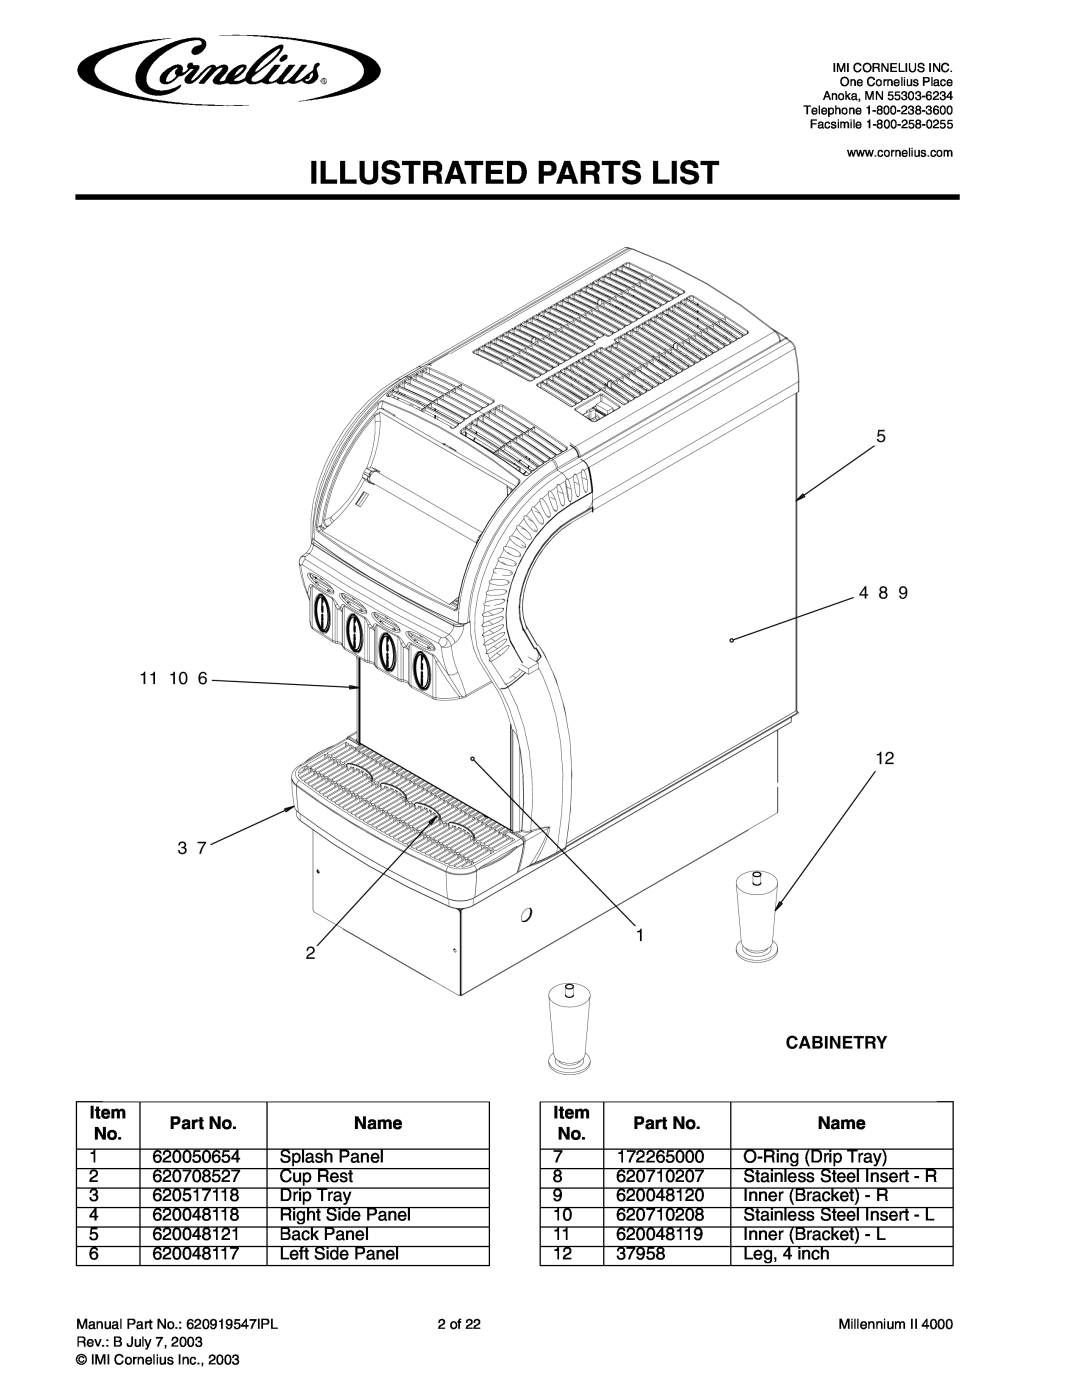 Cornelius MJ32-4 PC, MJ32-4 PB, MJ30-4 PB, MJ30-4 PC, MJ31-4 PB, MJ31-4 PC Illustrated Parts List, Name, Cabinetry 